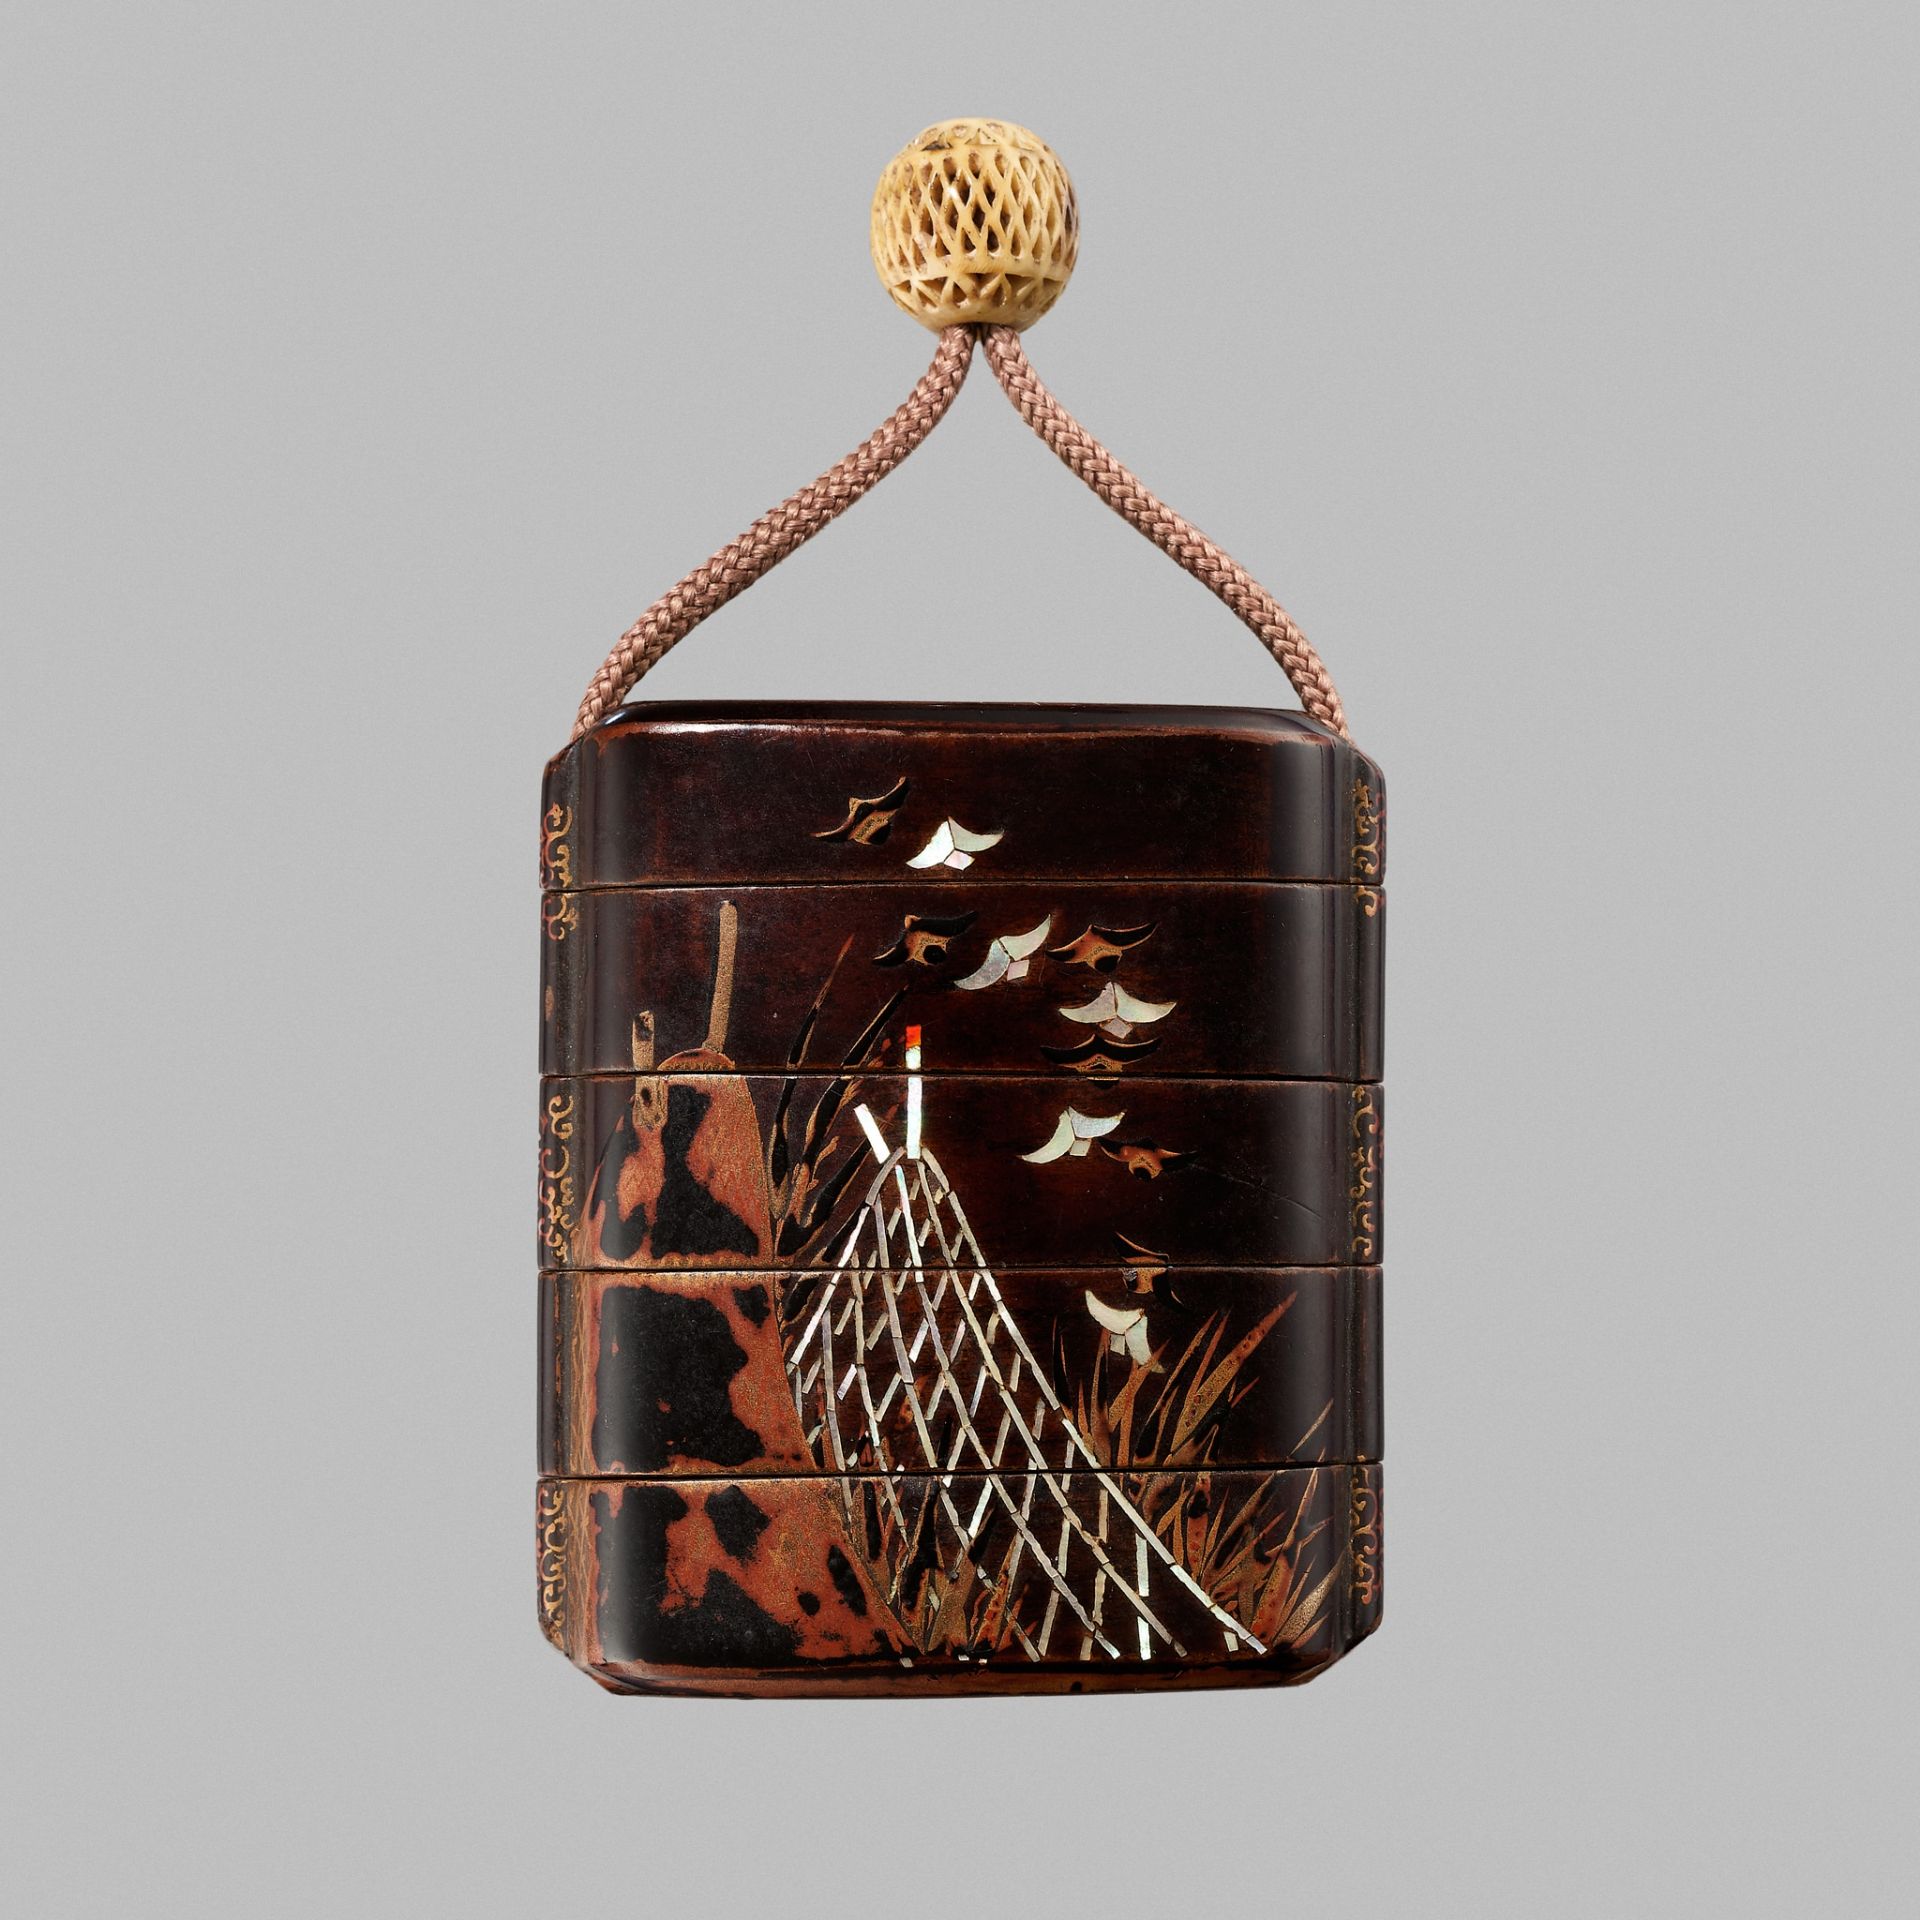 A FINE FOUR-CASE INRO DEPICTING BIRDS IN FLIGHT ABOVE NETS AND FISH TRAPS